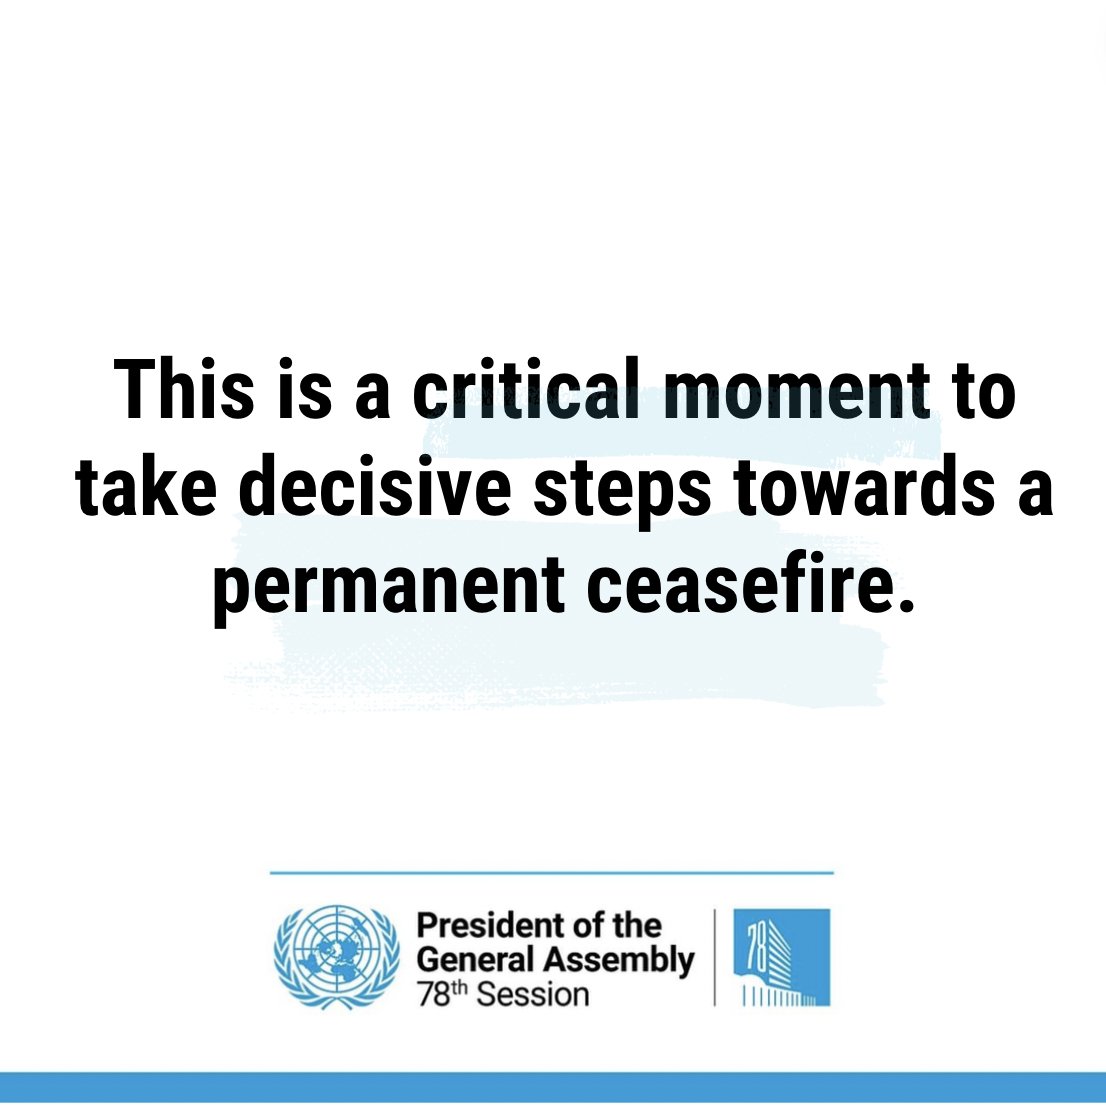 Deeply concerned about Israel’s imminent incursion targeting the eastern part of Rafah, a city where over 1 million displaced Palestinians are sheltering and already in most dire conditions. Let’s be clear - such an inconsiderate operation simply means more humanitarian…